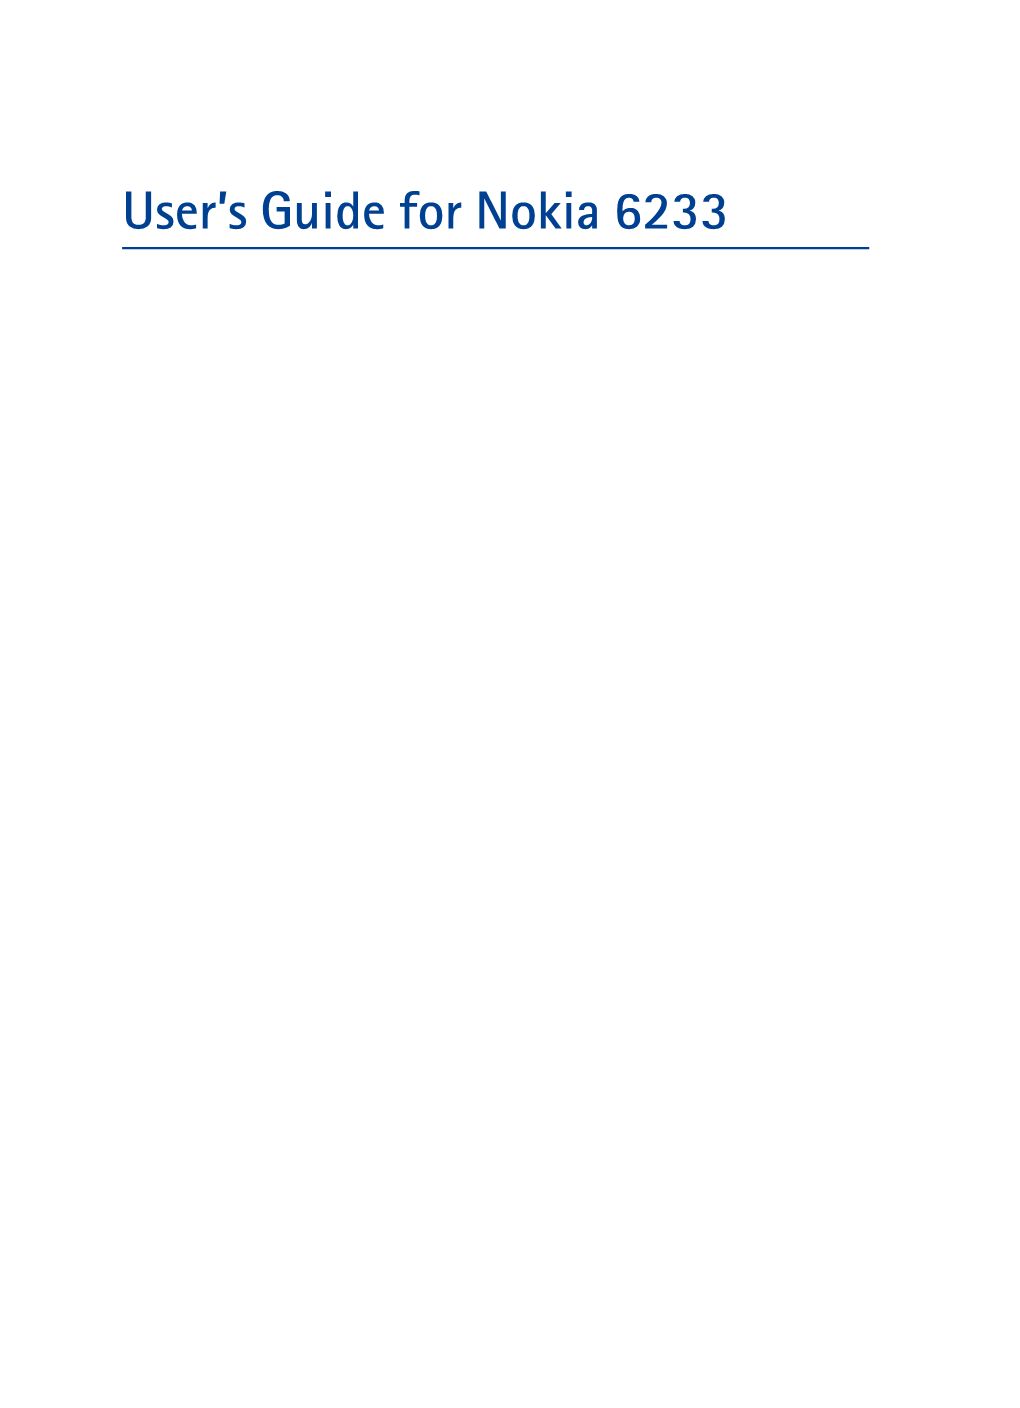 User's Guide for Nokia 6233